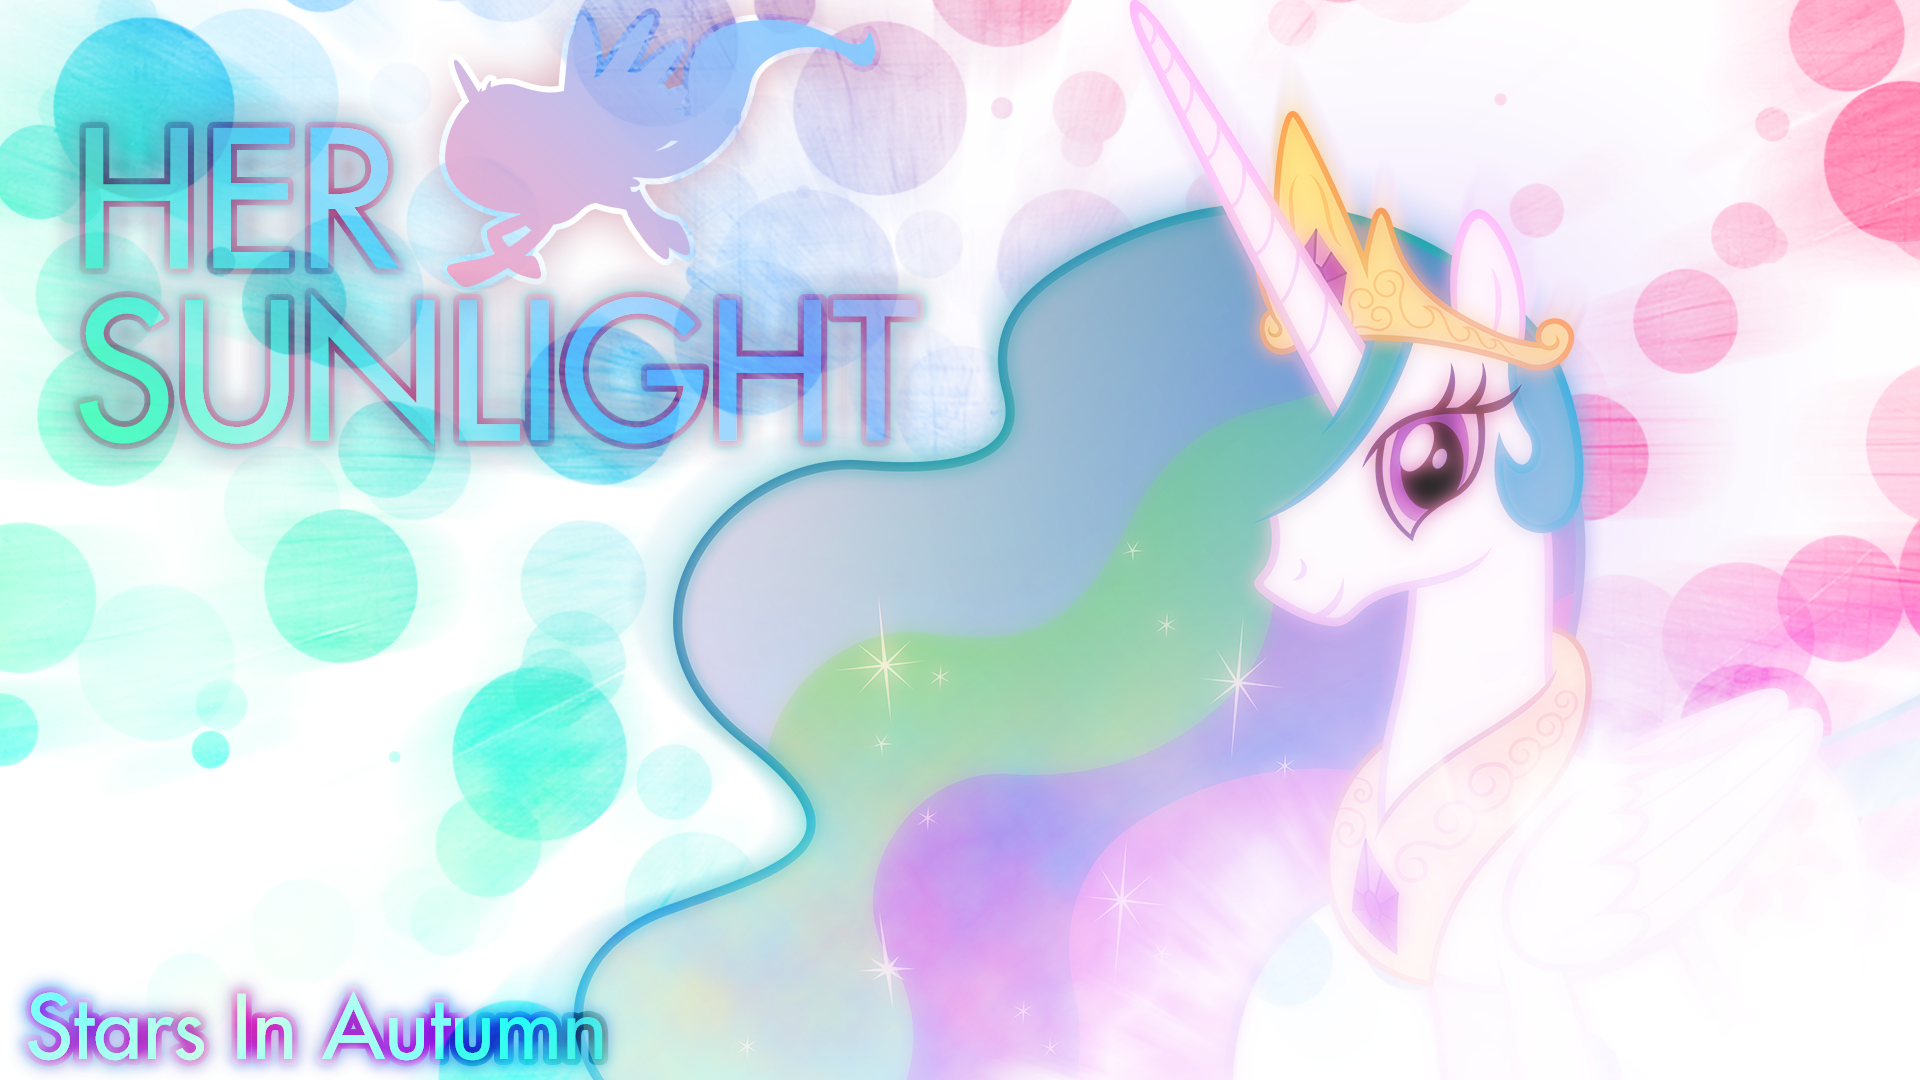 Her Sunlight - Cover Art by KibbieTheGreat, Stabzor and sunran80